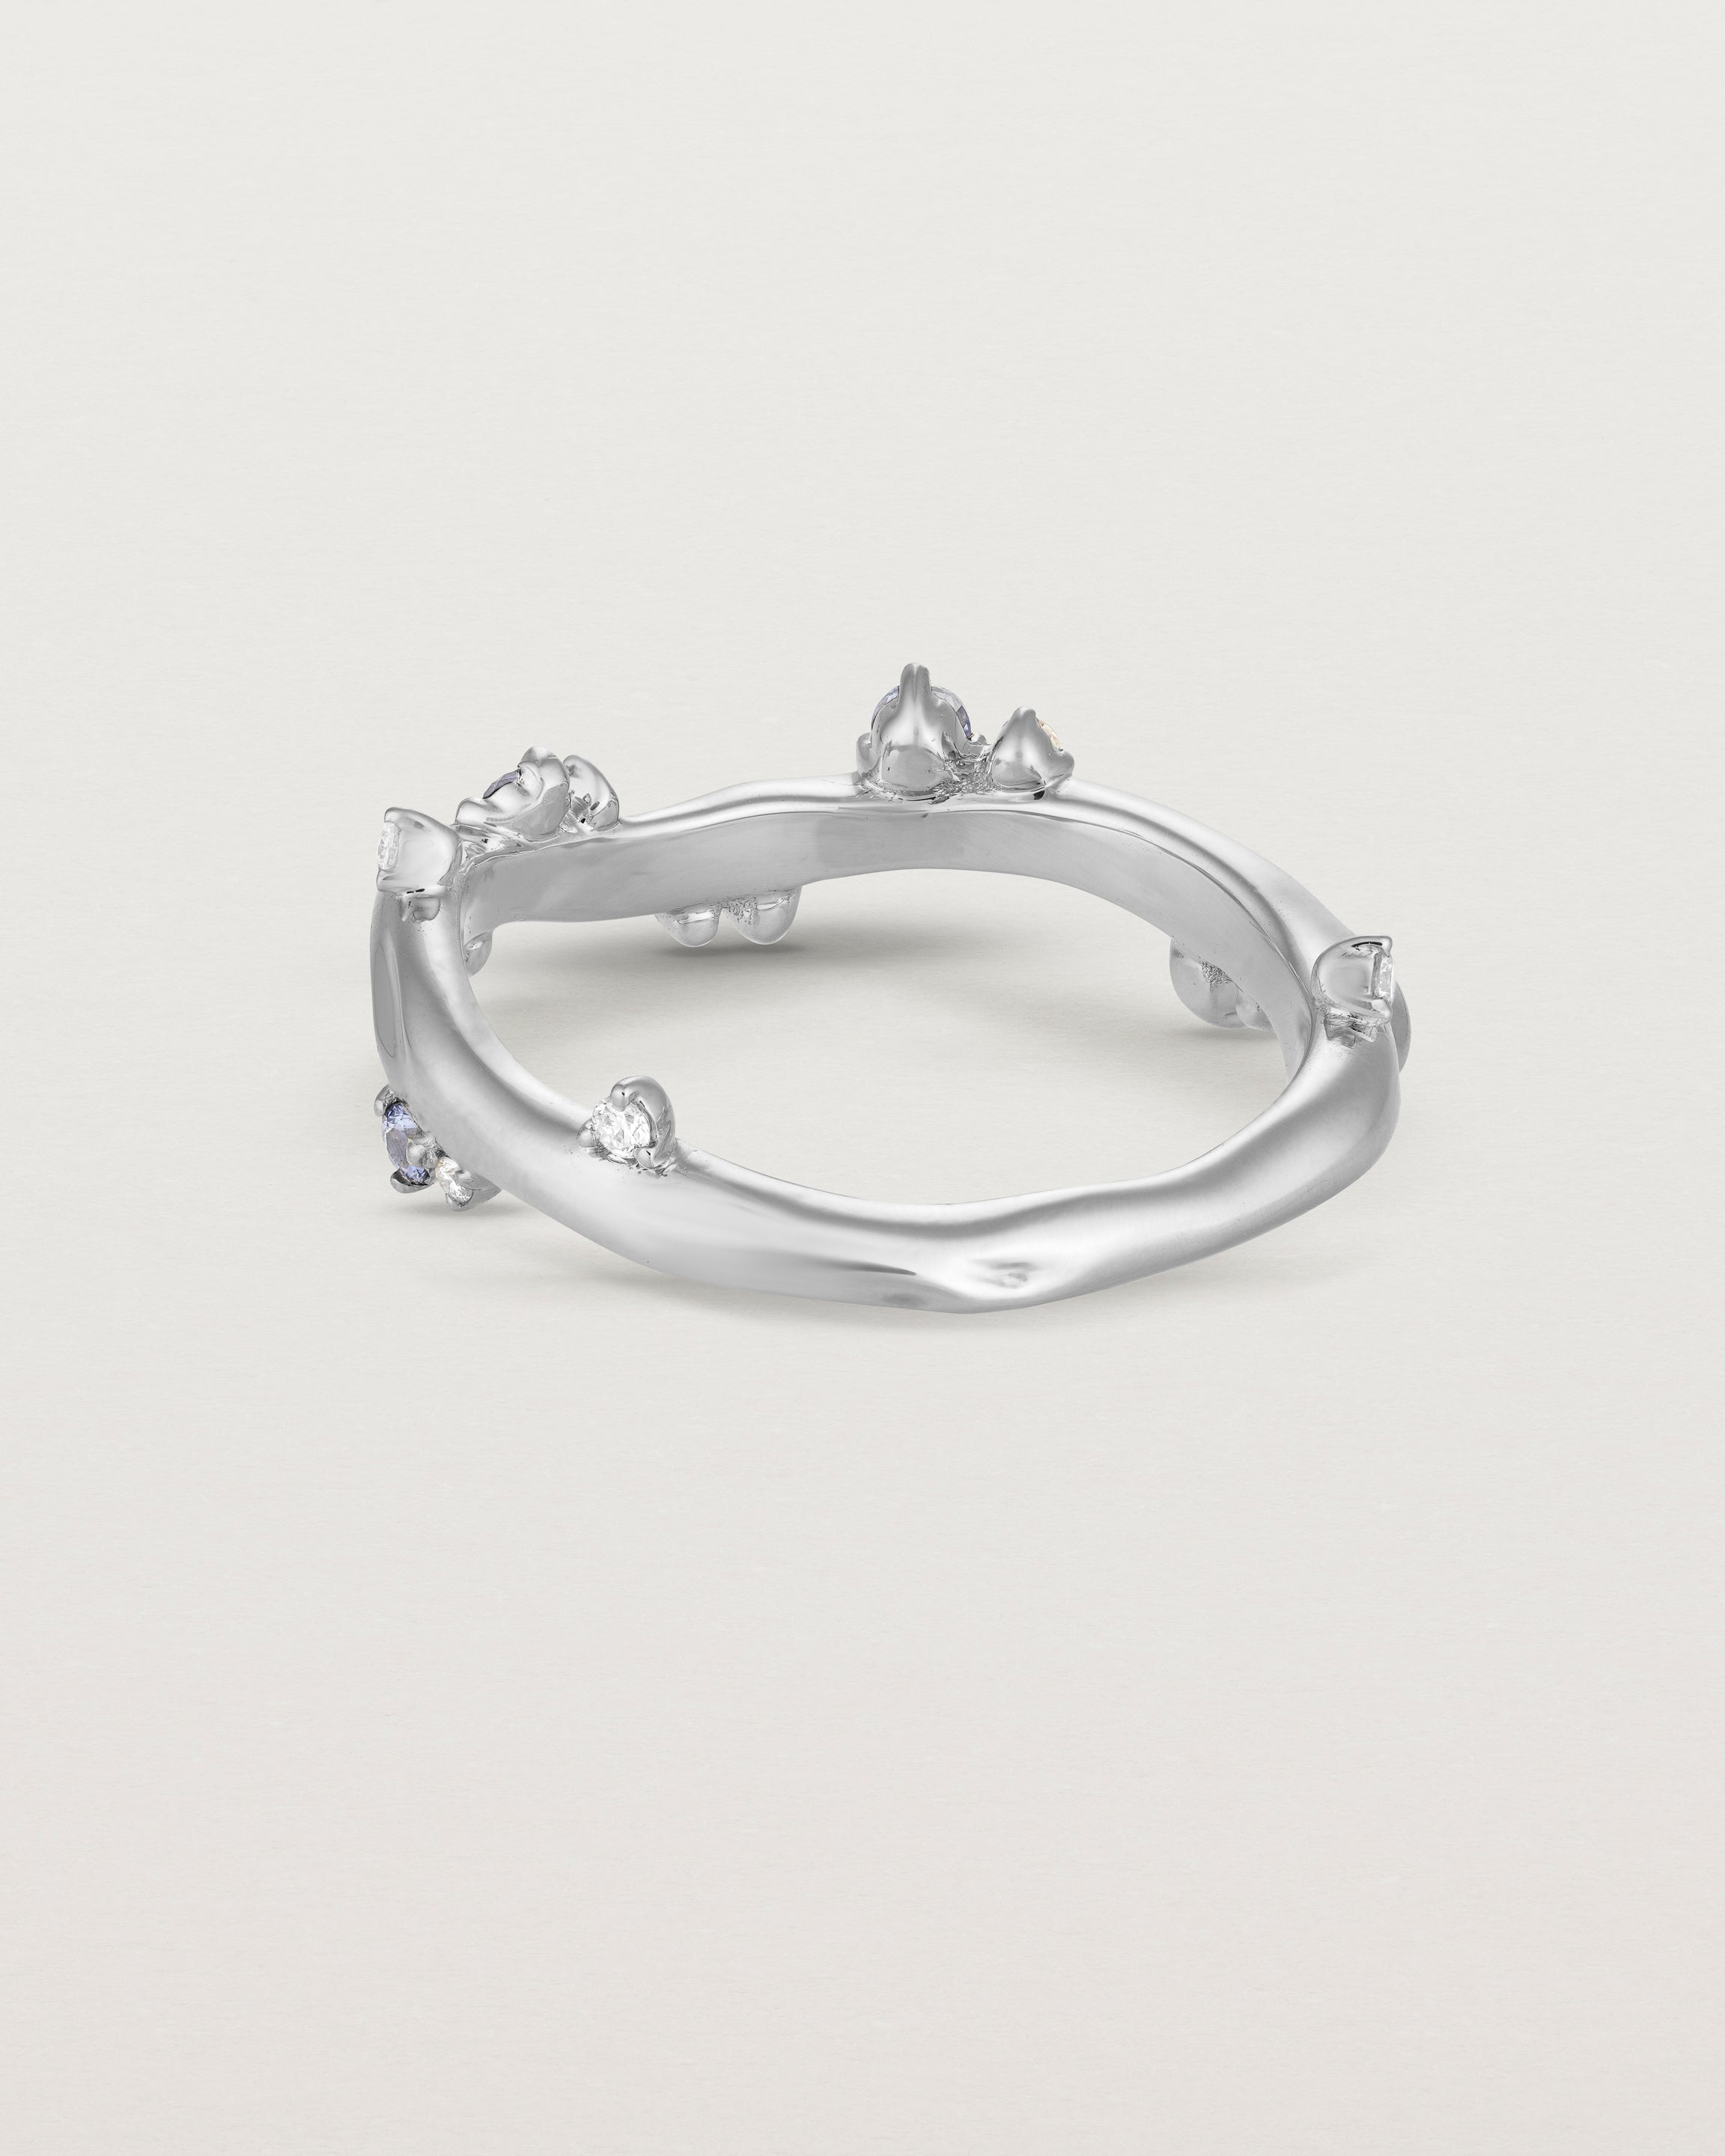 Back image of the Ember ring in white gold featuring a scattering of white diamonds and blue sapphires.